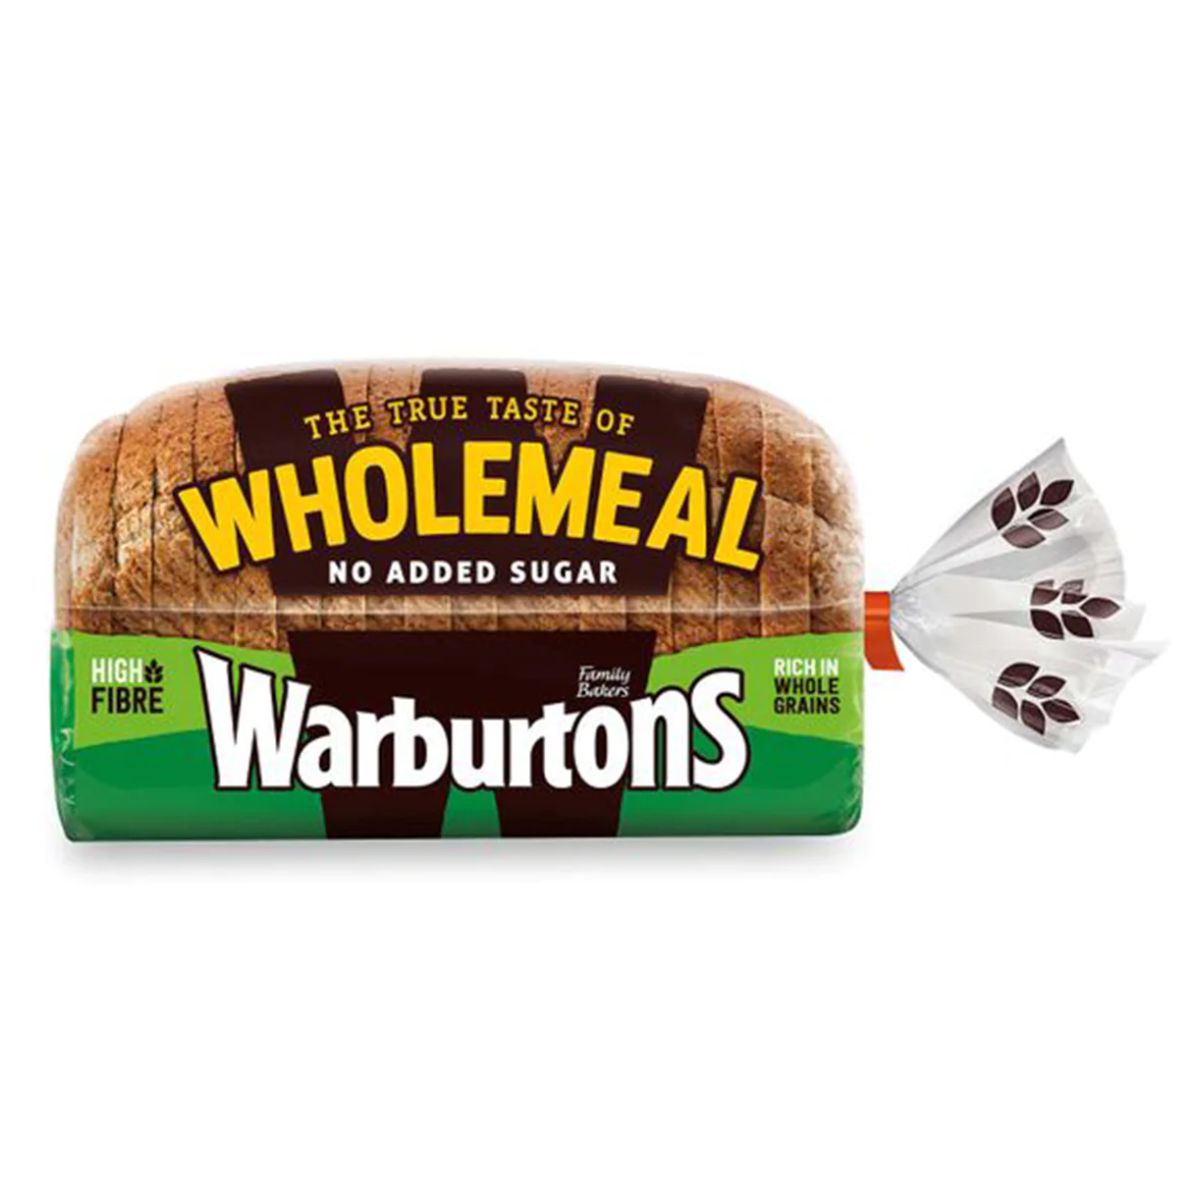 A packaged loaf of Warburtons Sugar Free Wholemeal Bread - 800g.